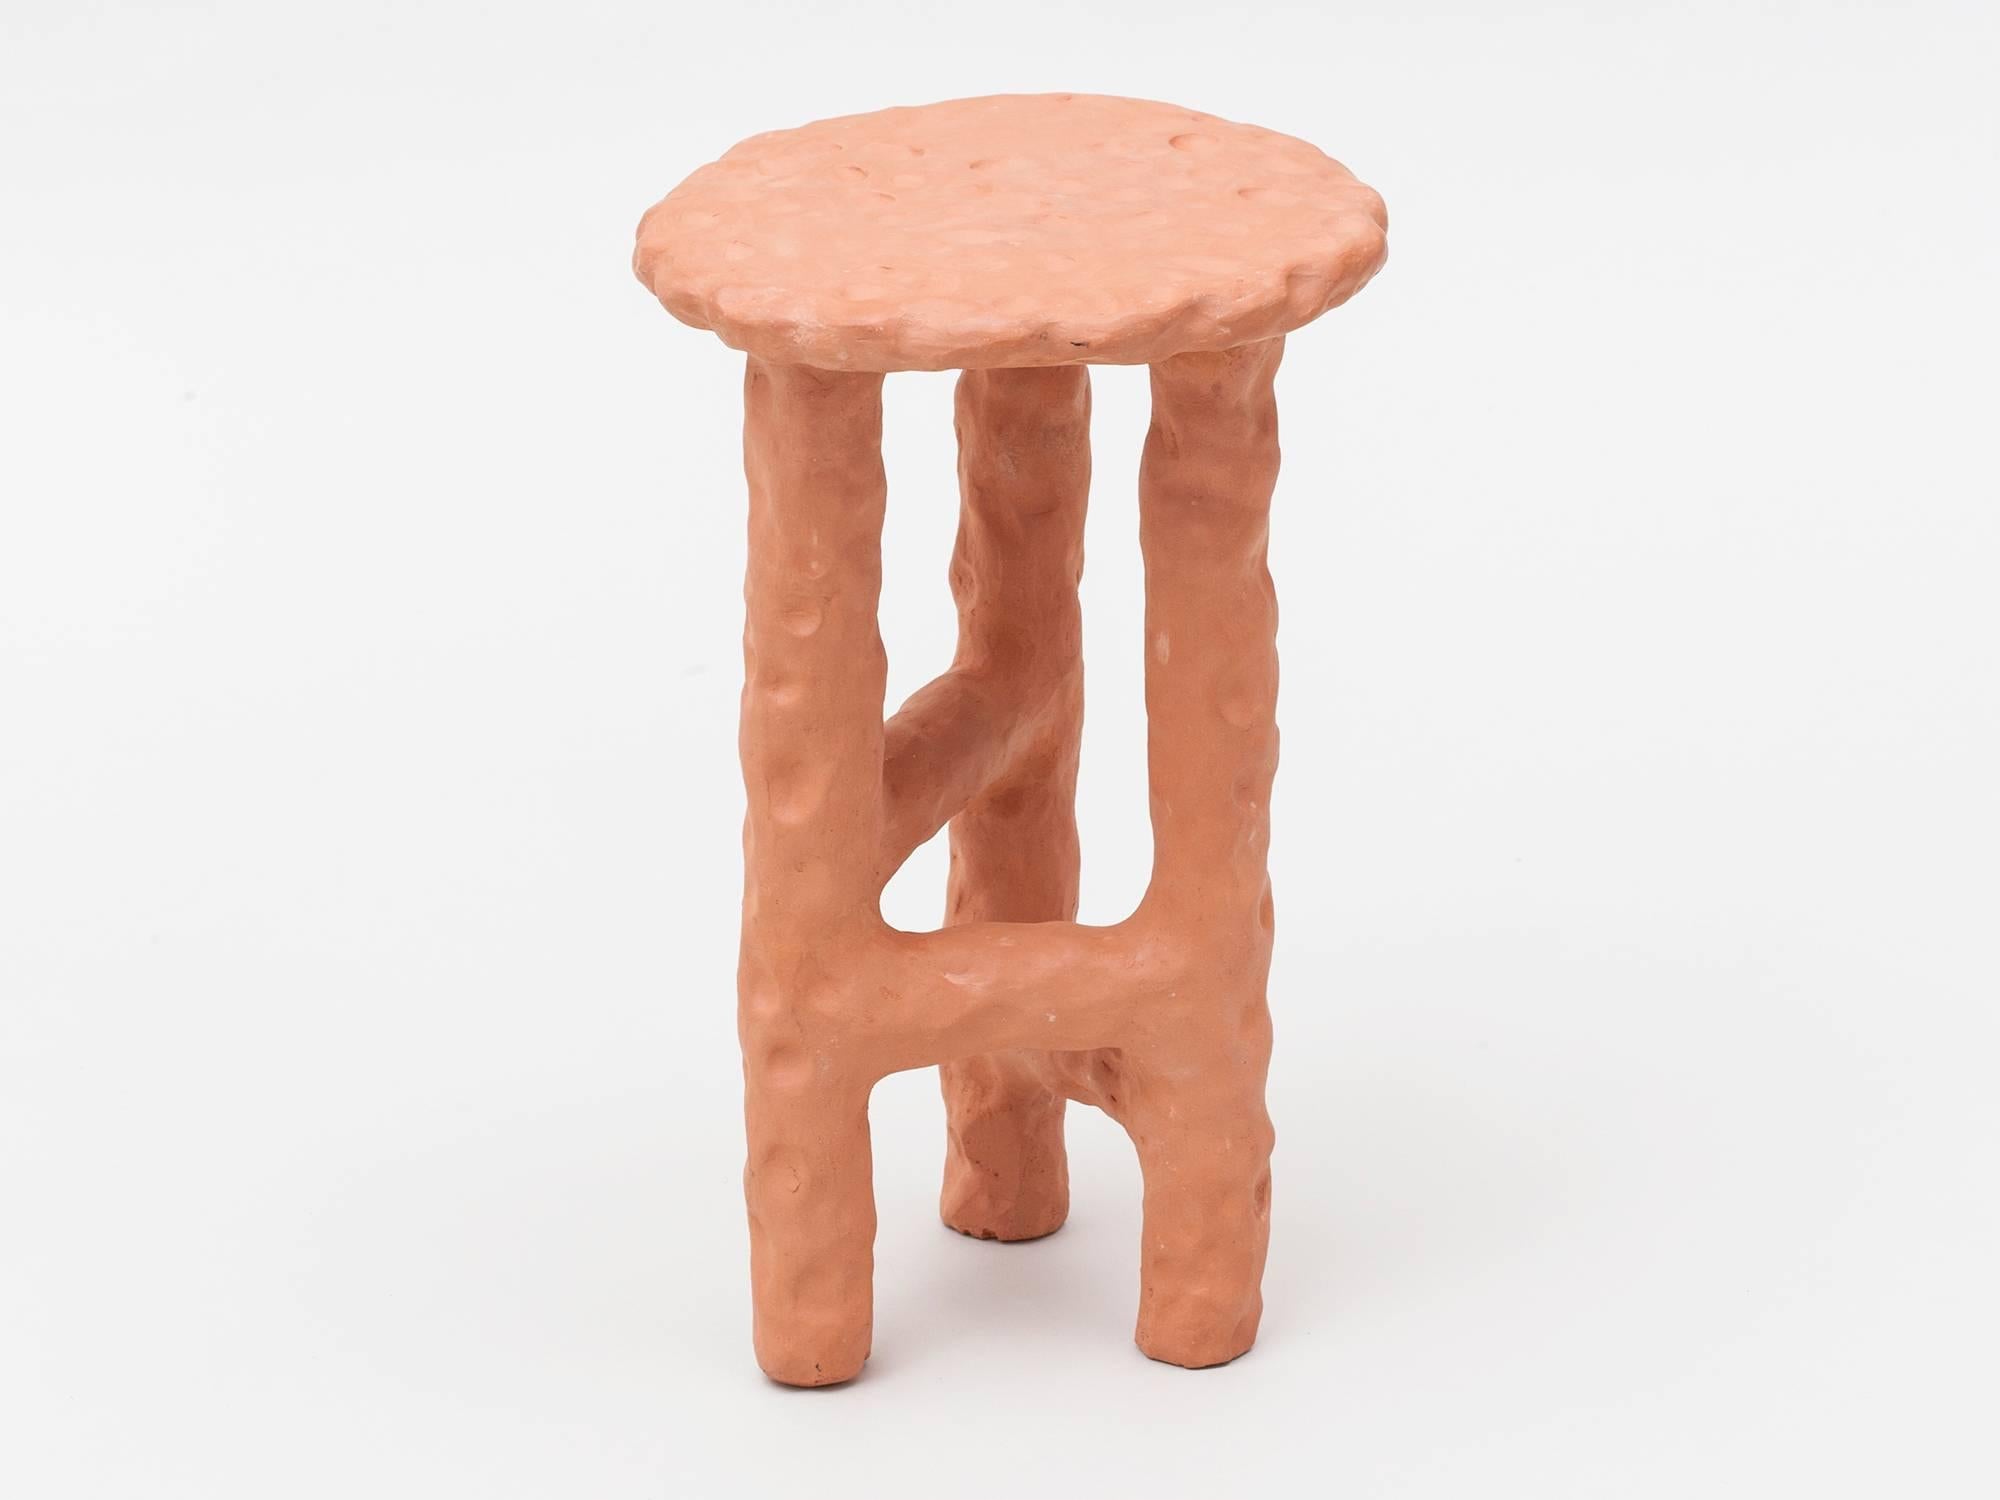 Beautiful side table handmade of solid terracotta by New York and Medellín-based artist Chris Wolston. Can be used indoors or outdoors – Please note, this cannot be left outside during the winter months in environments where the temperature falls